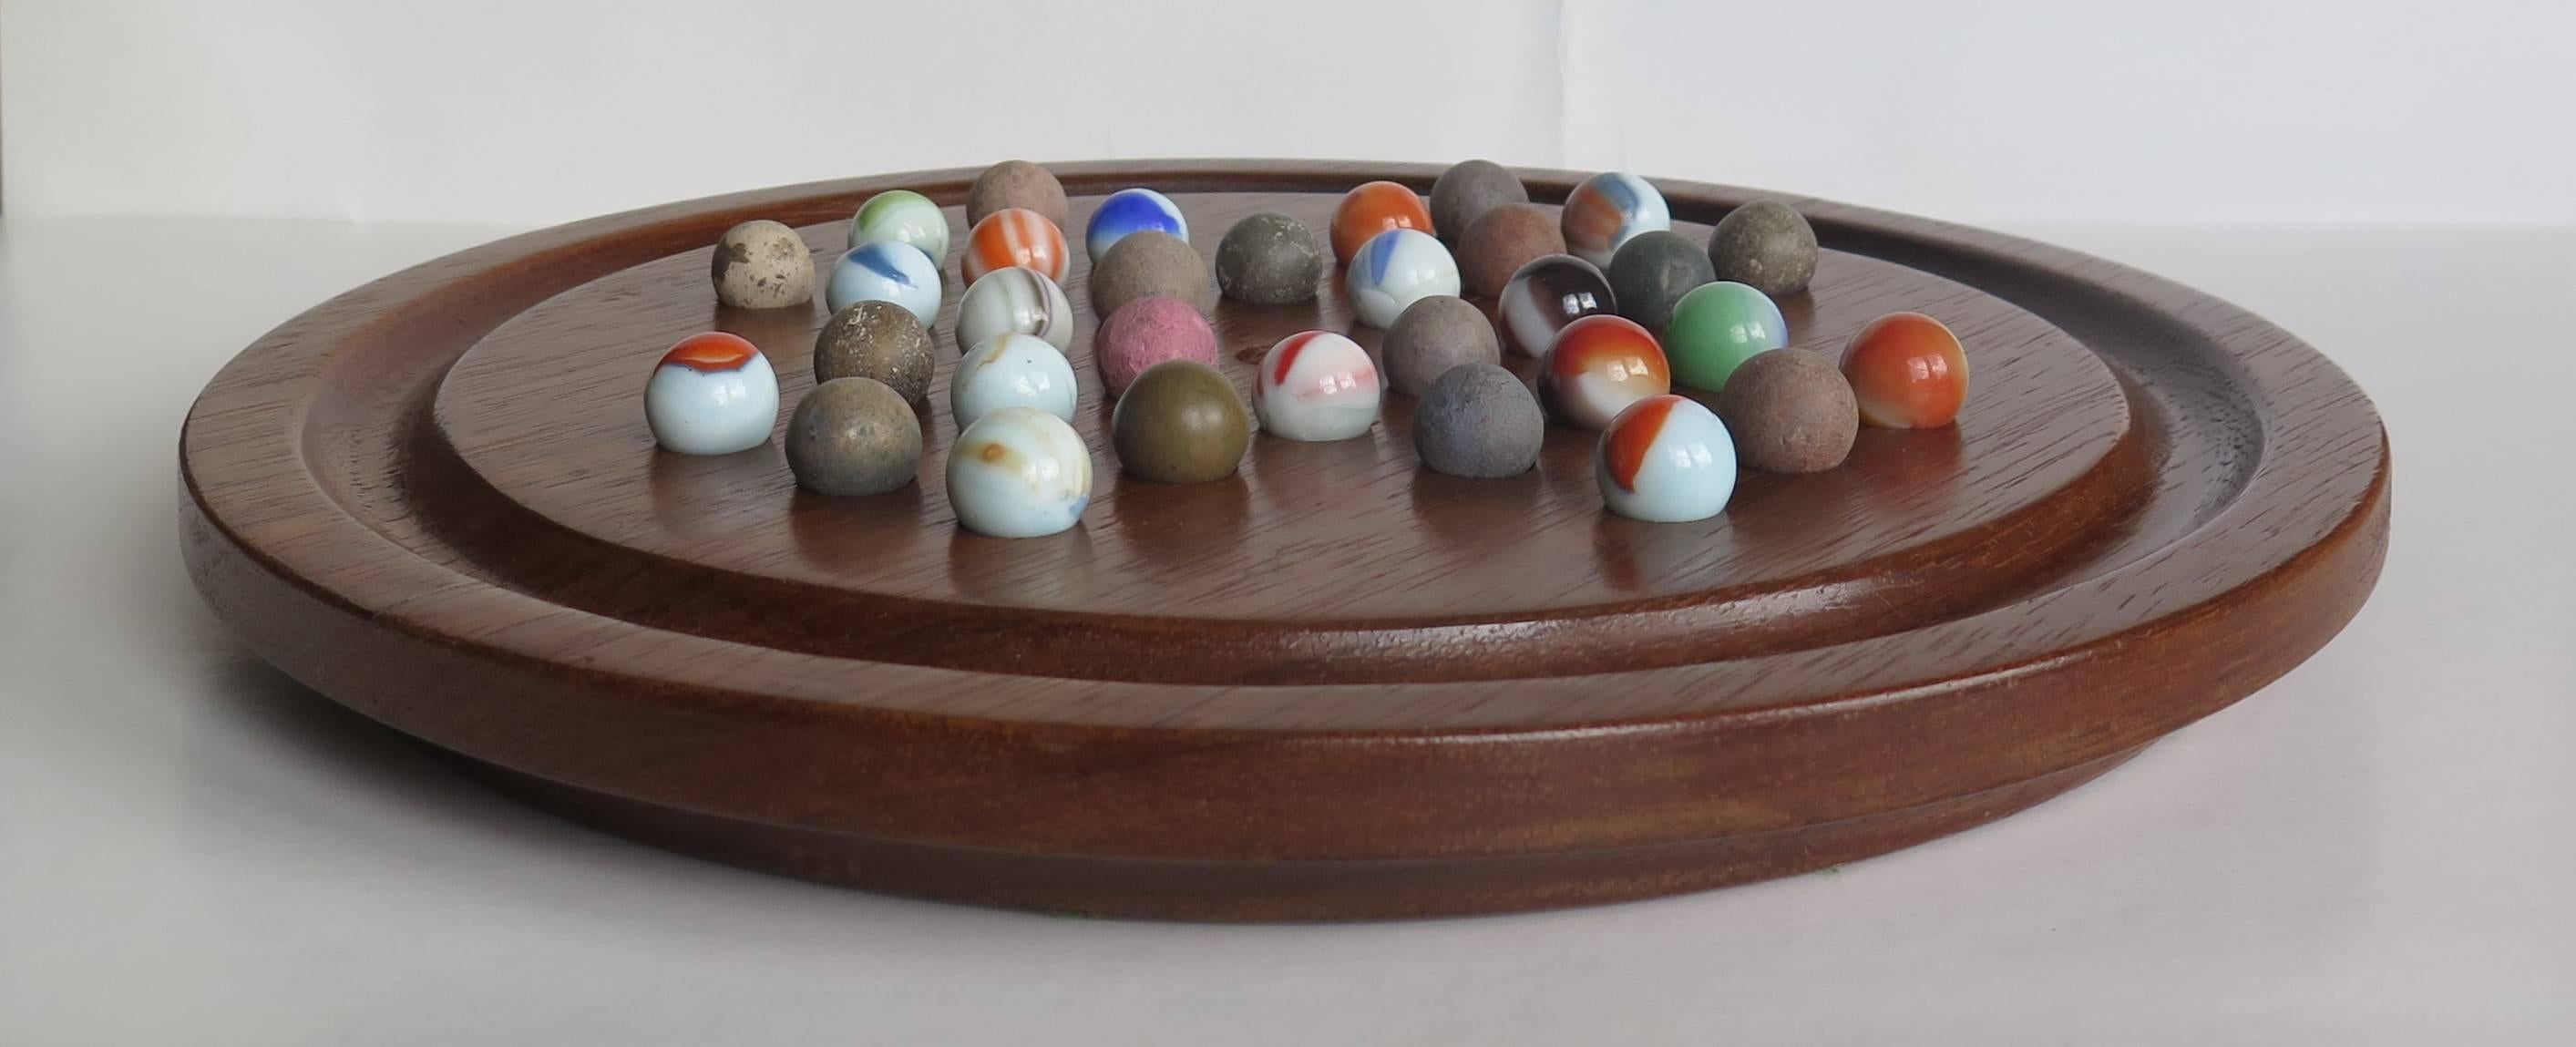 Late Victorian 19th Century Table Marble Solitaire Board Game, Early Handmade Marbles